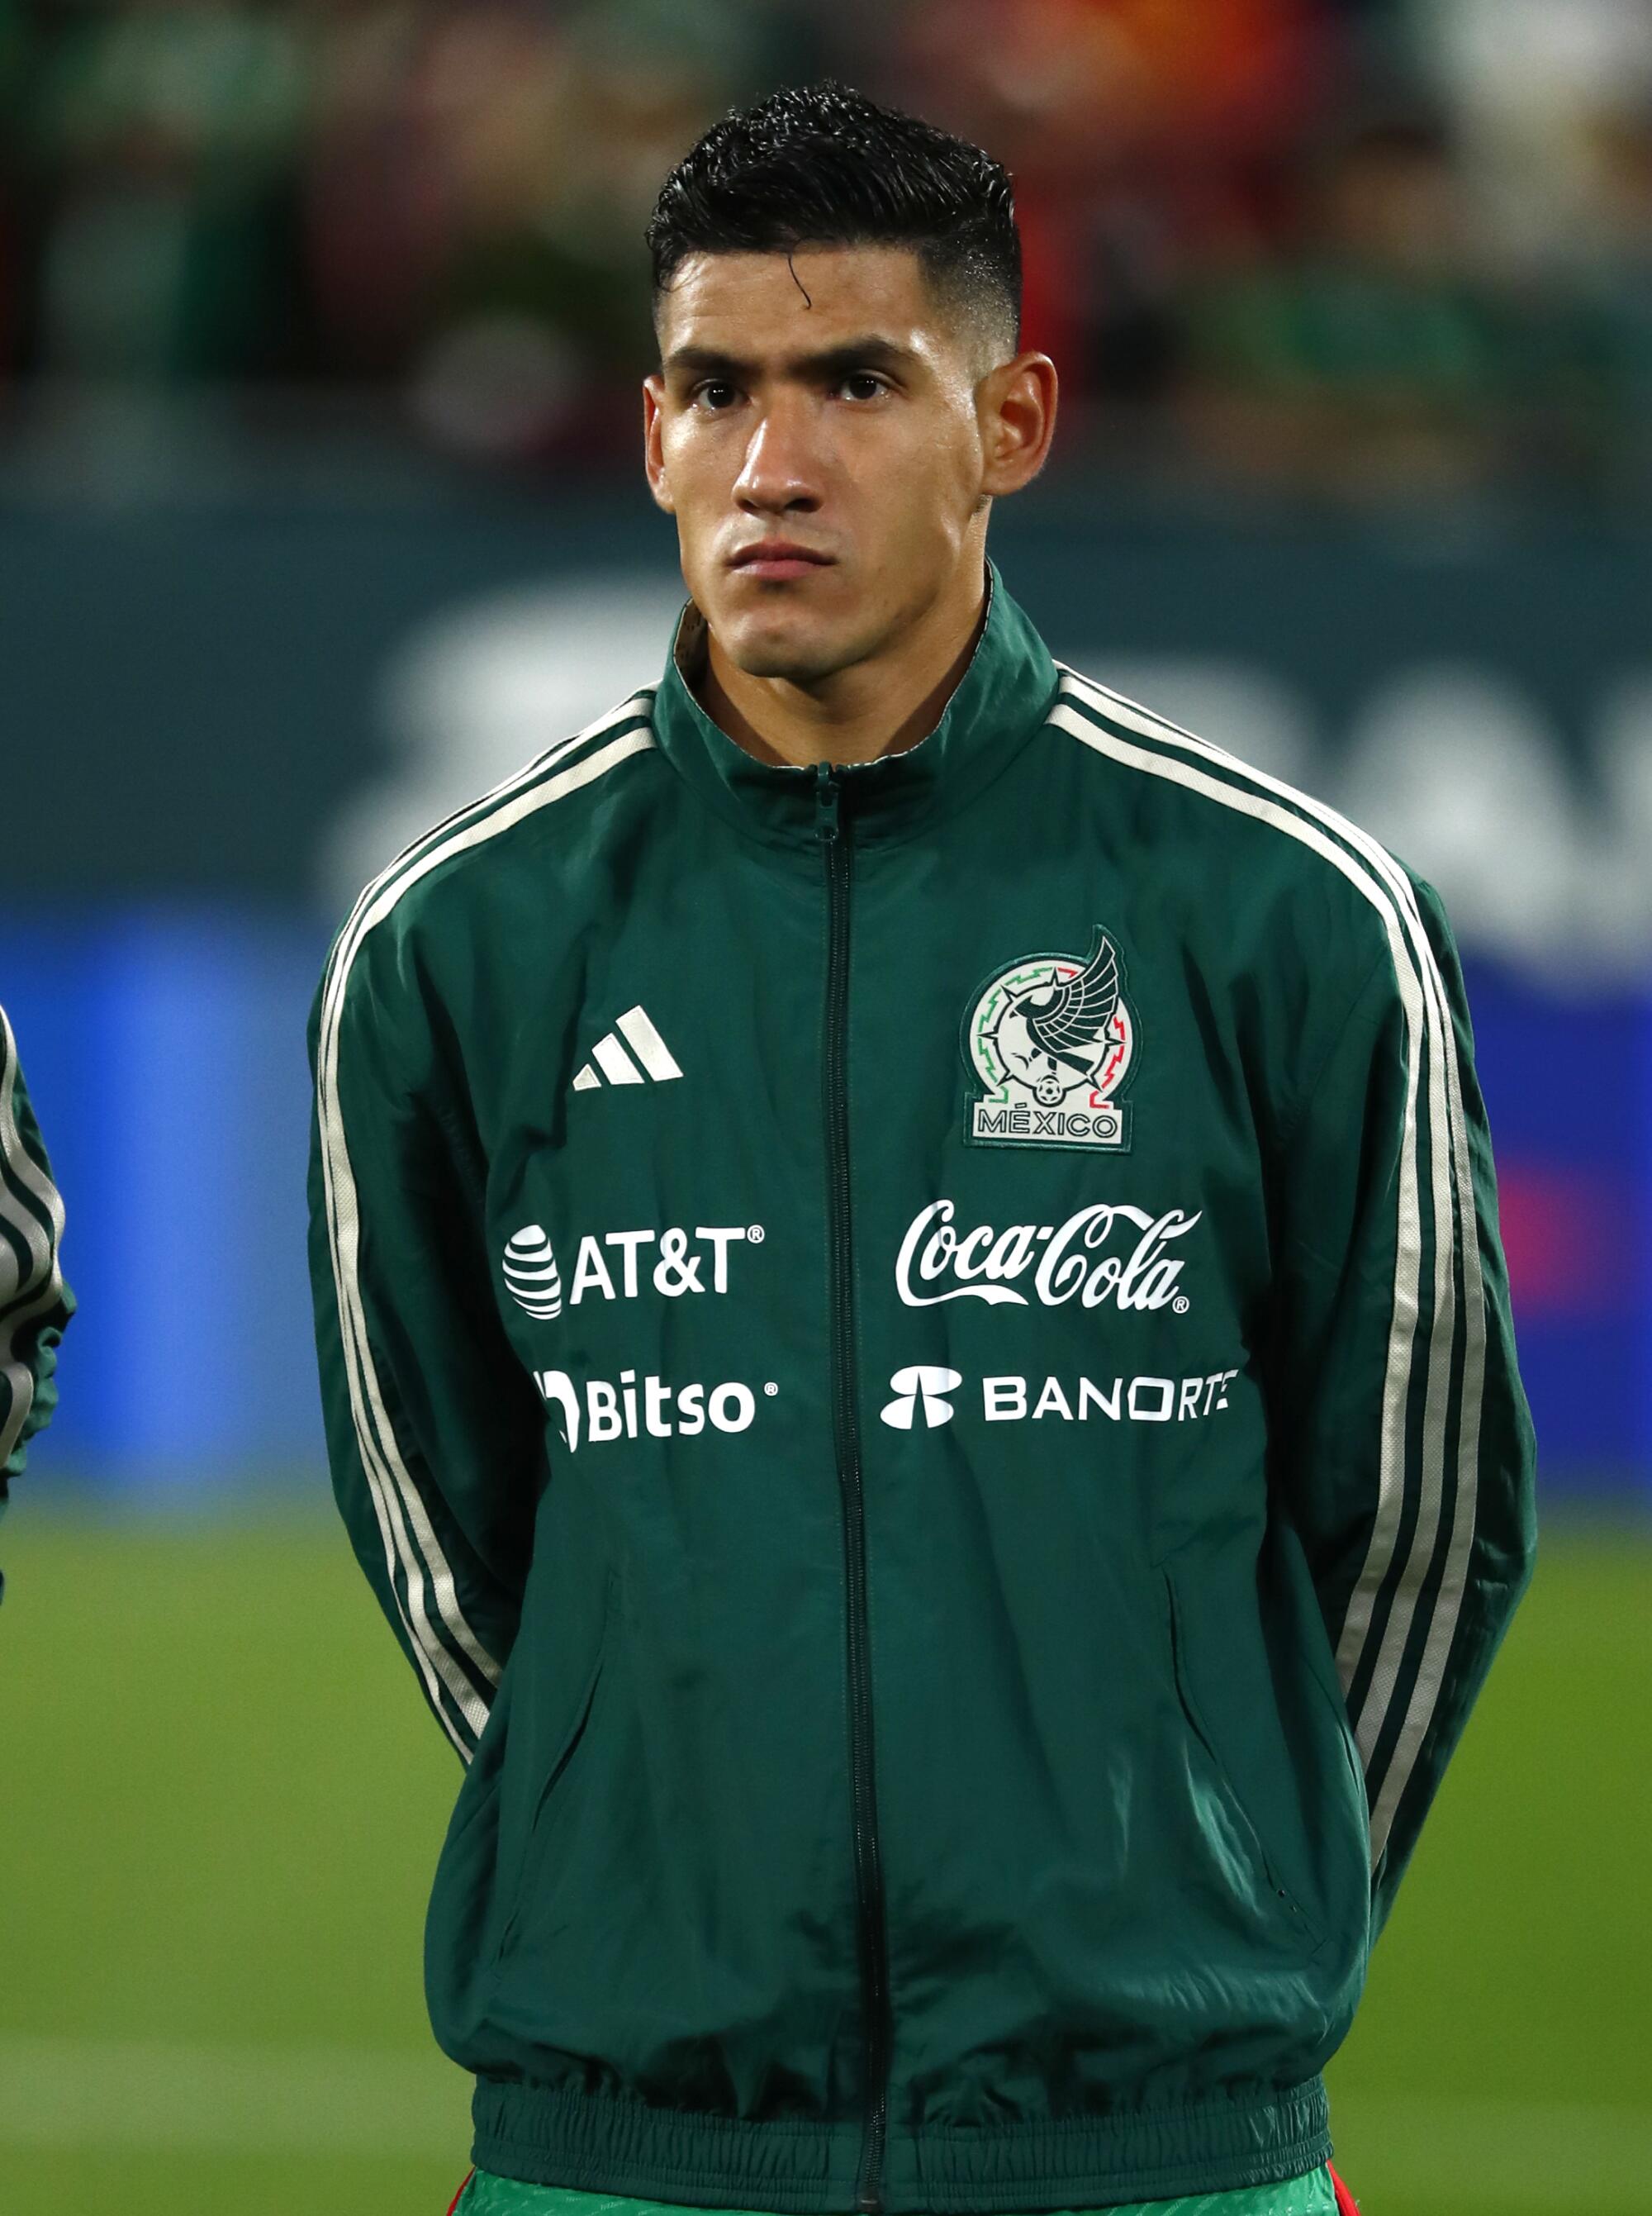 Uriel Antuna prepares to warm up with Mexico teammates before an international friendly against Sweden.